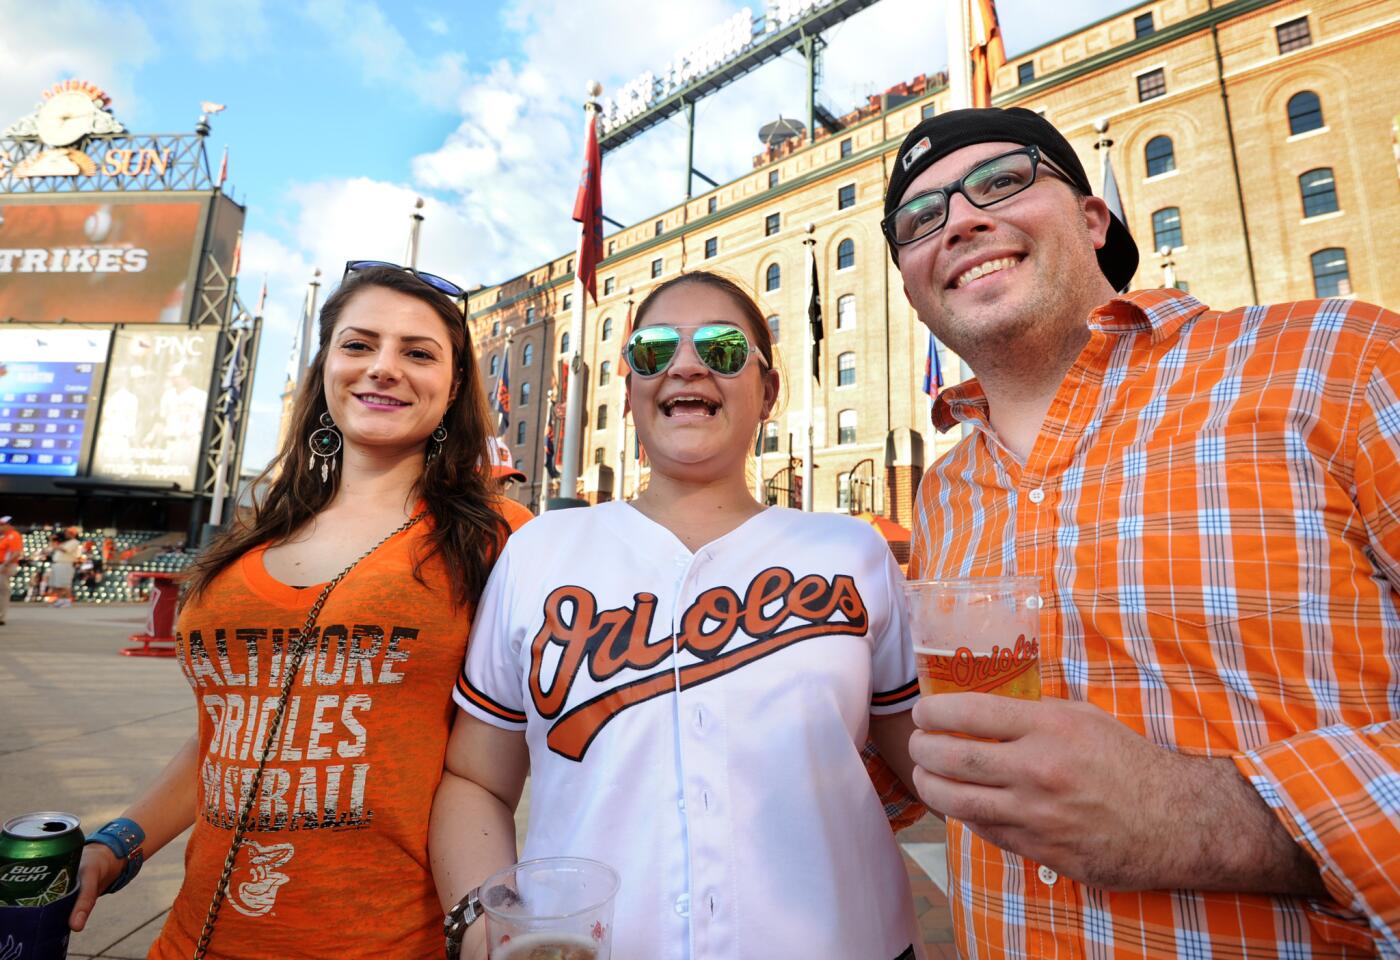 Orioles fans from left: Sara Giraldo, 29, Ellicott City; her sister Natacha Giraldo, 31, Federal Hill; and Adam Booth, 31, Federal Hill. Fans returned to Camden Yards for the first time since April 25, due to the riots and unrest in Baltimore because of the death of Freddie Gray.